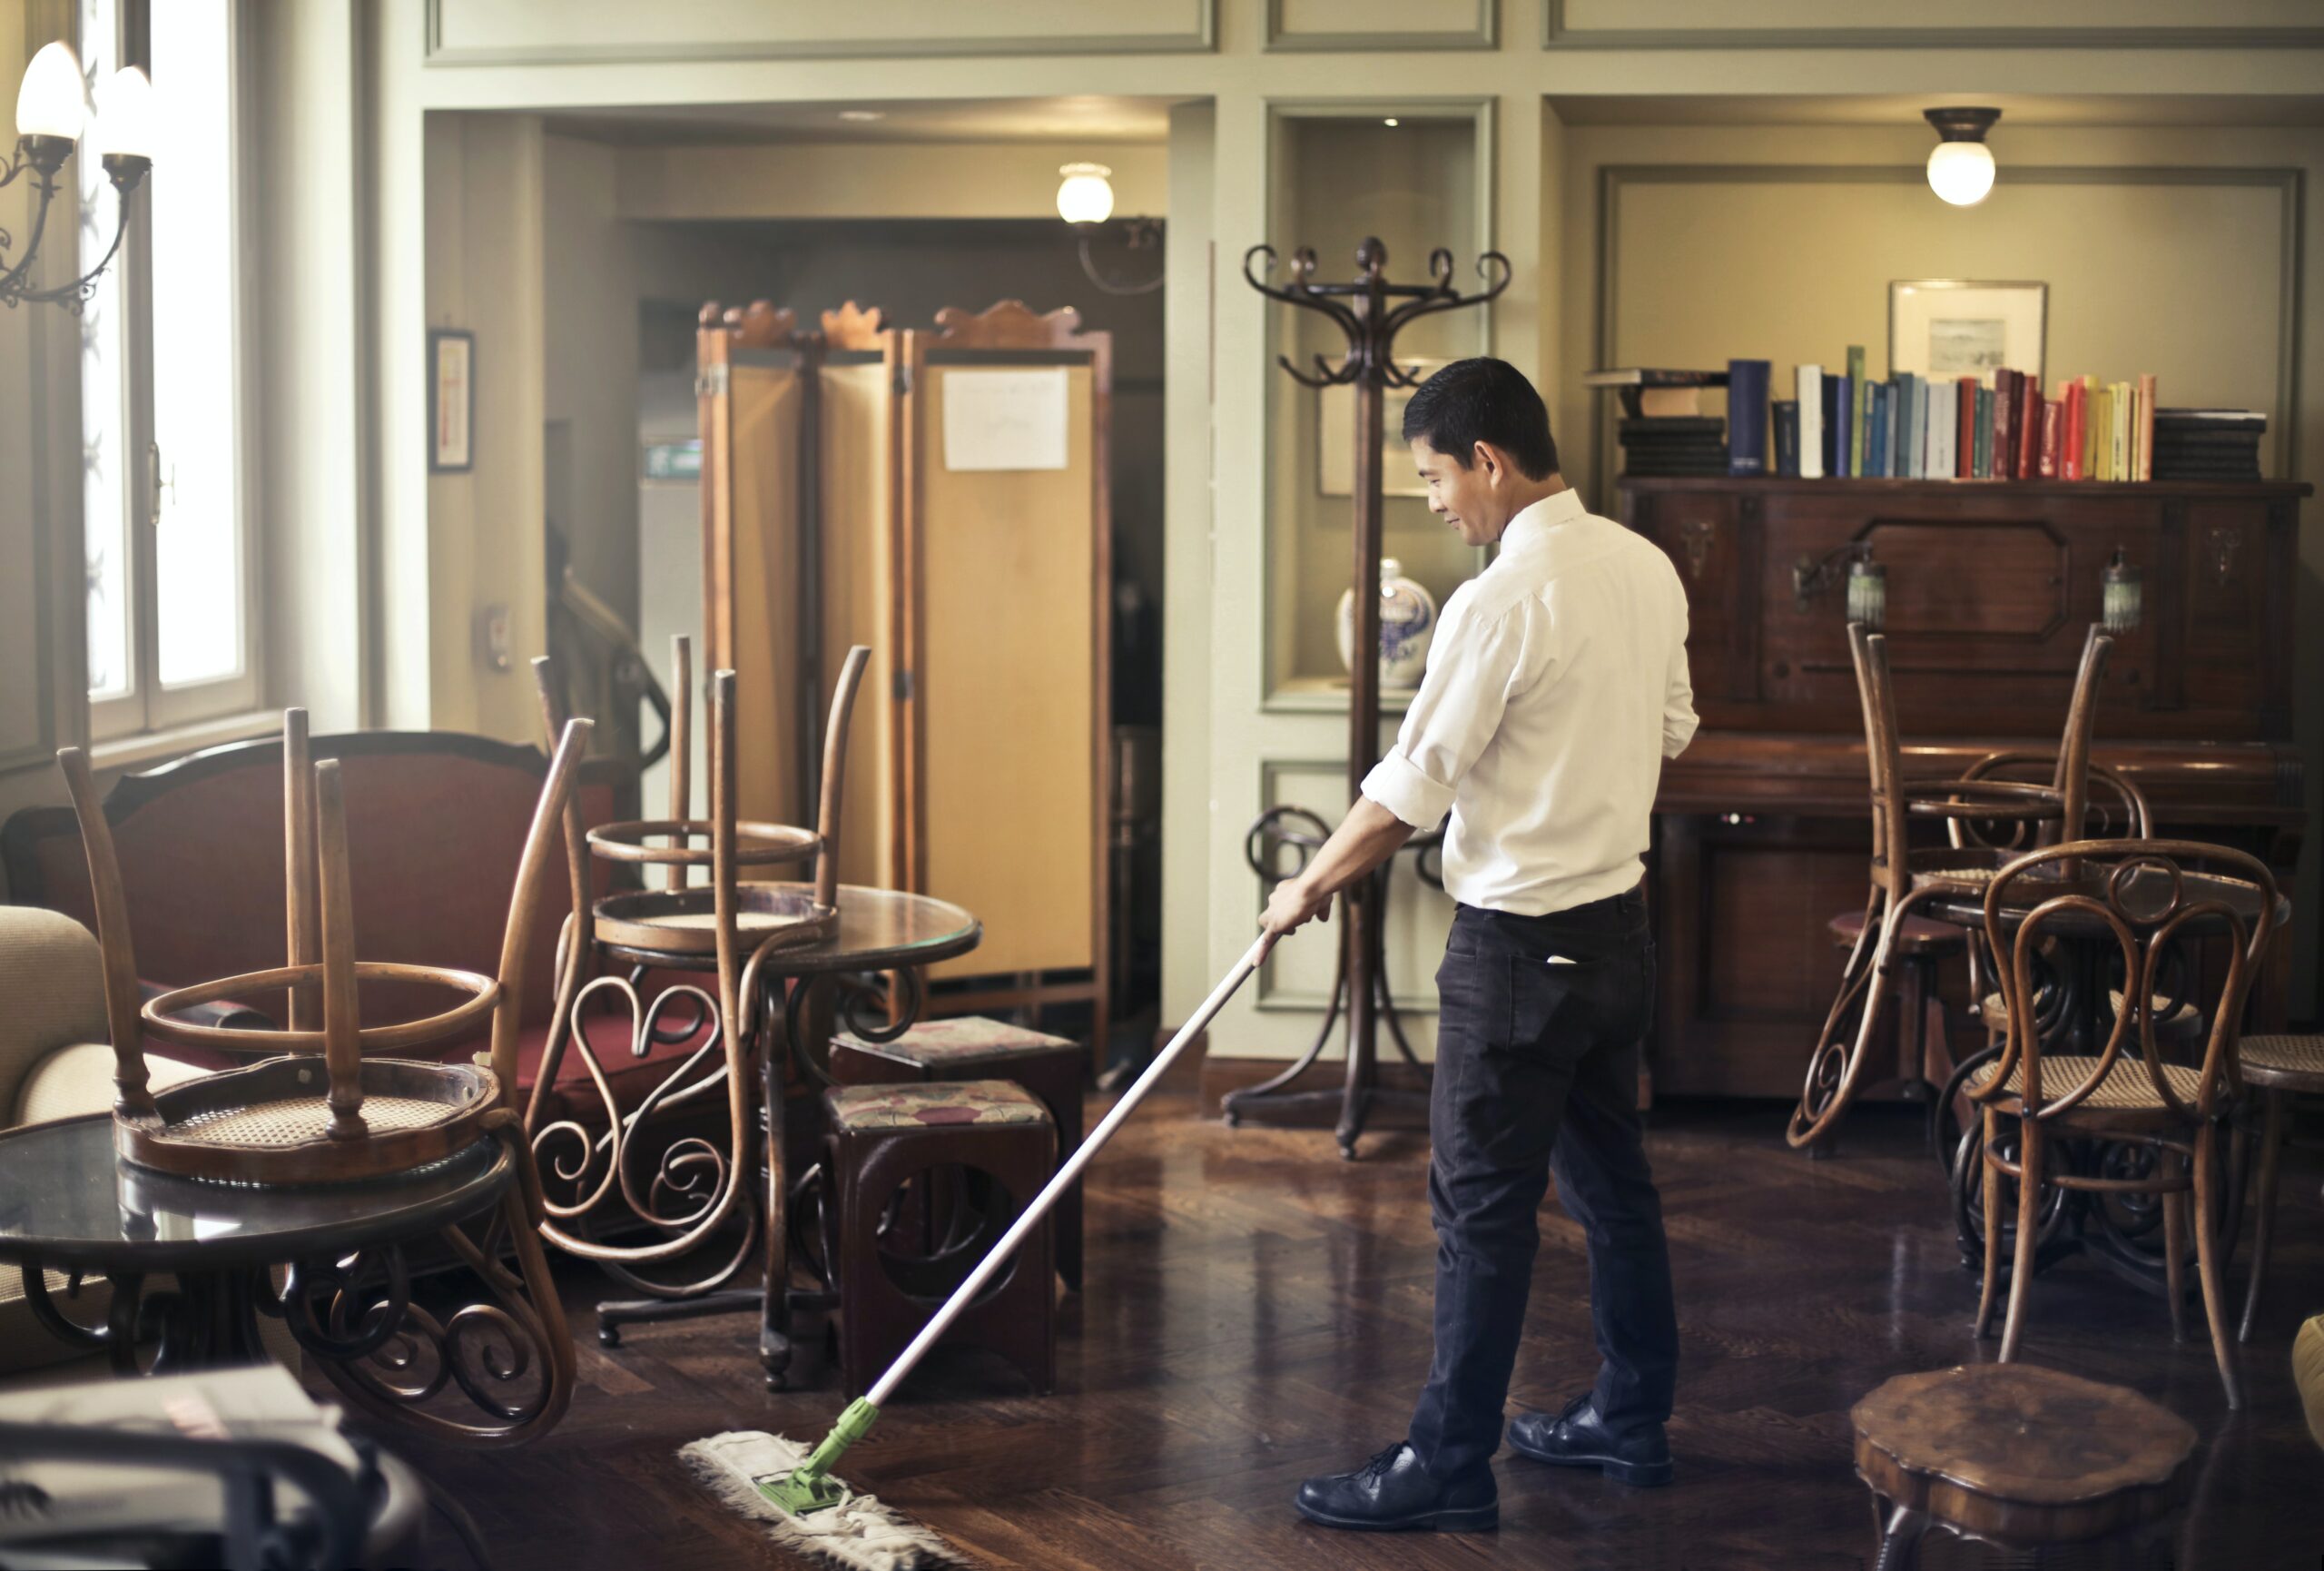 Employee of Ontario Cleaning Supply and Services happily cleaning